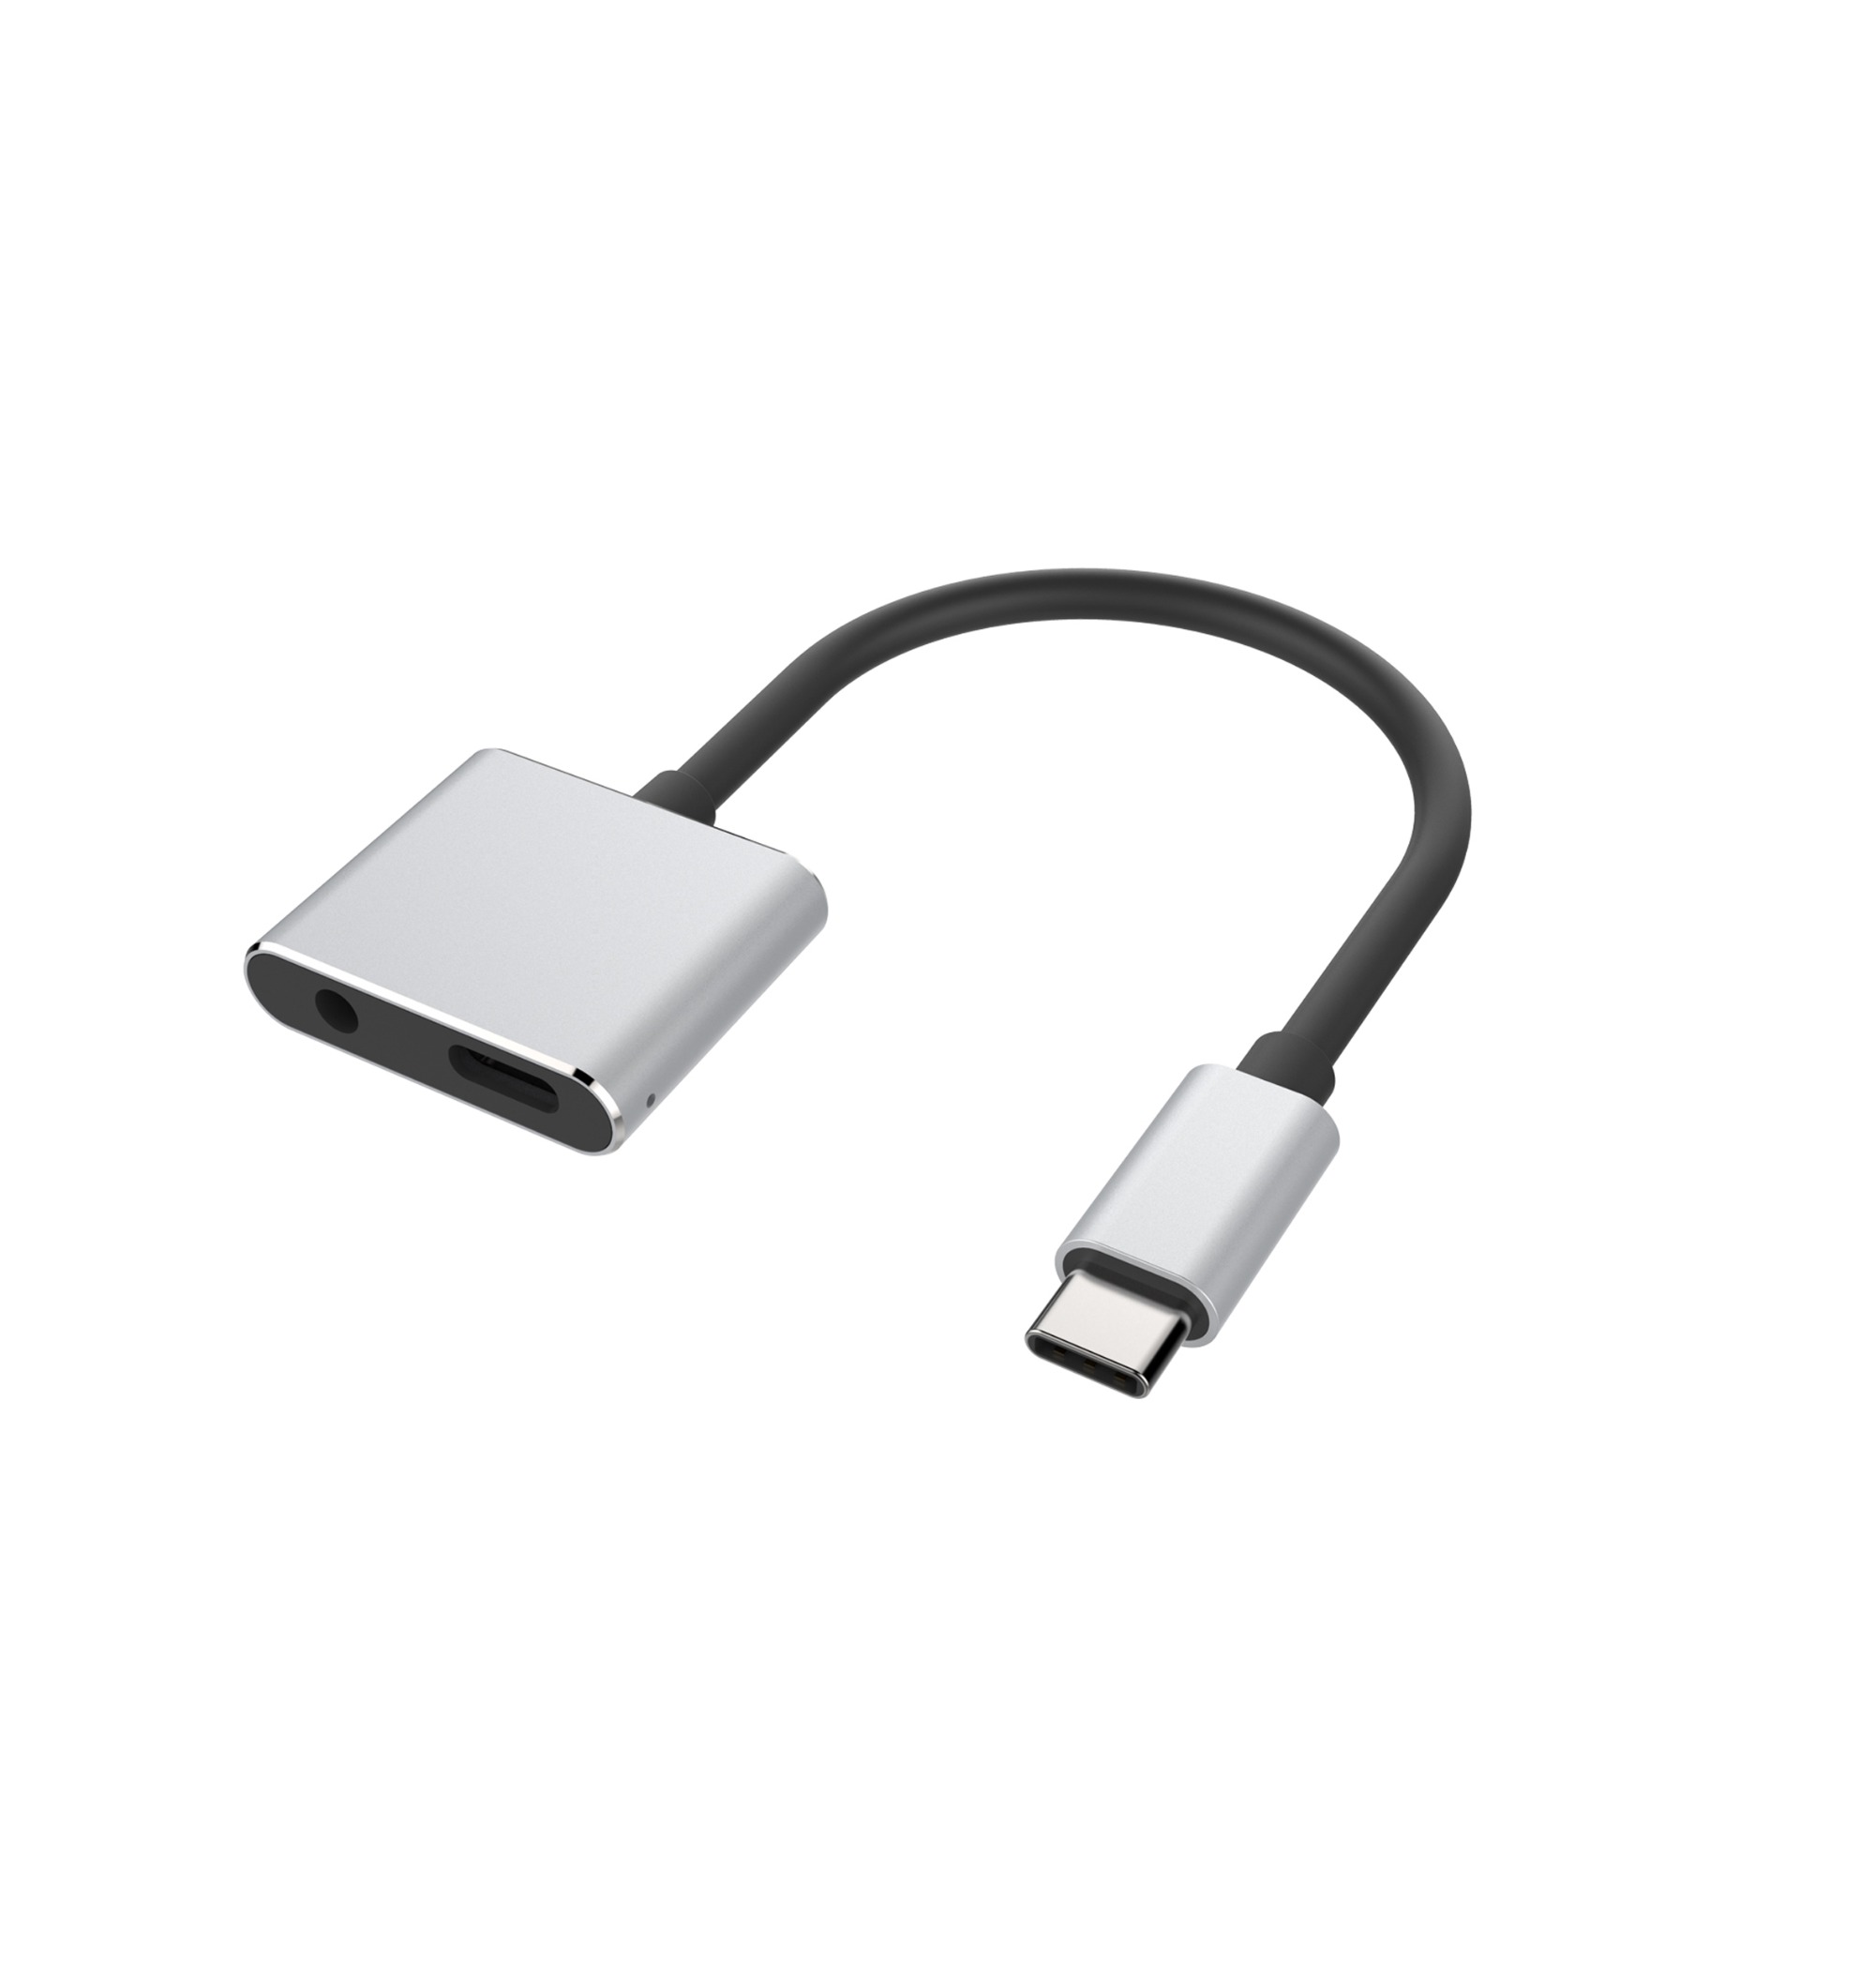 Charger and Headphone Audio Adapter for Type C device